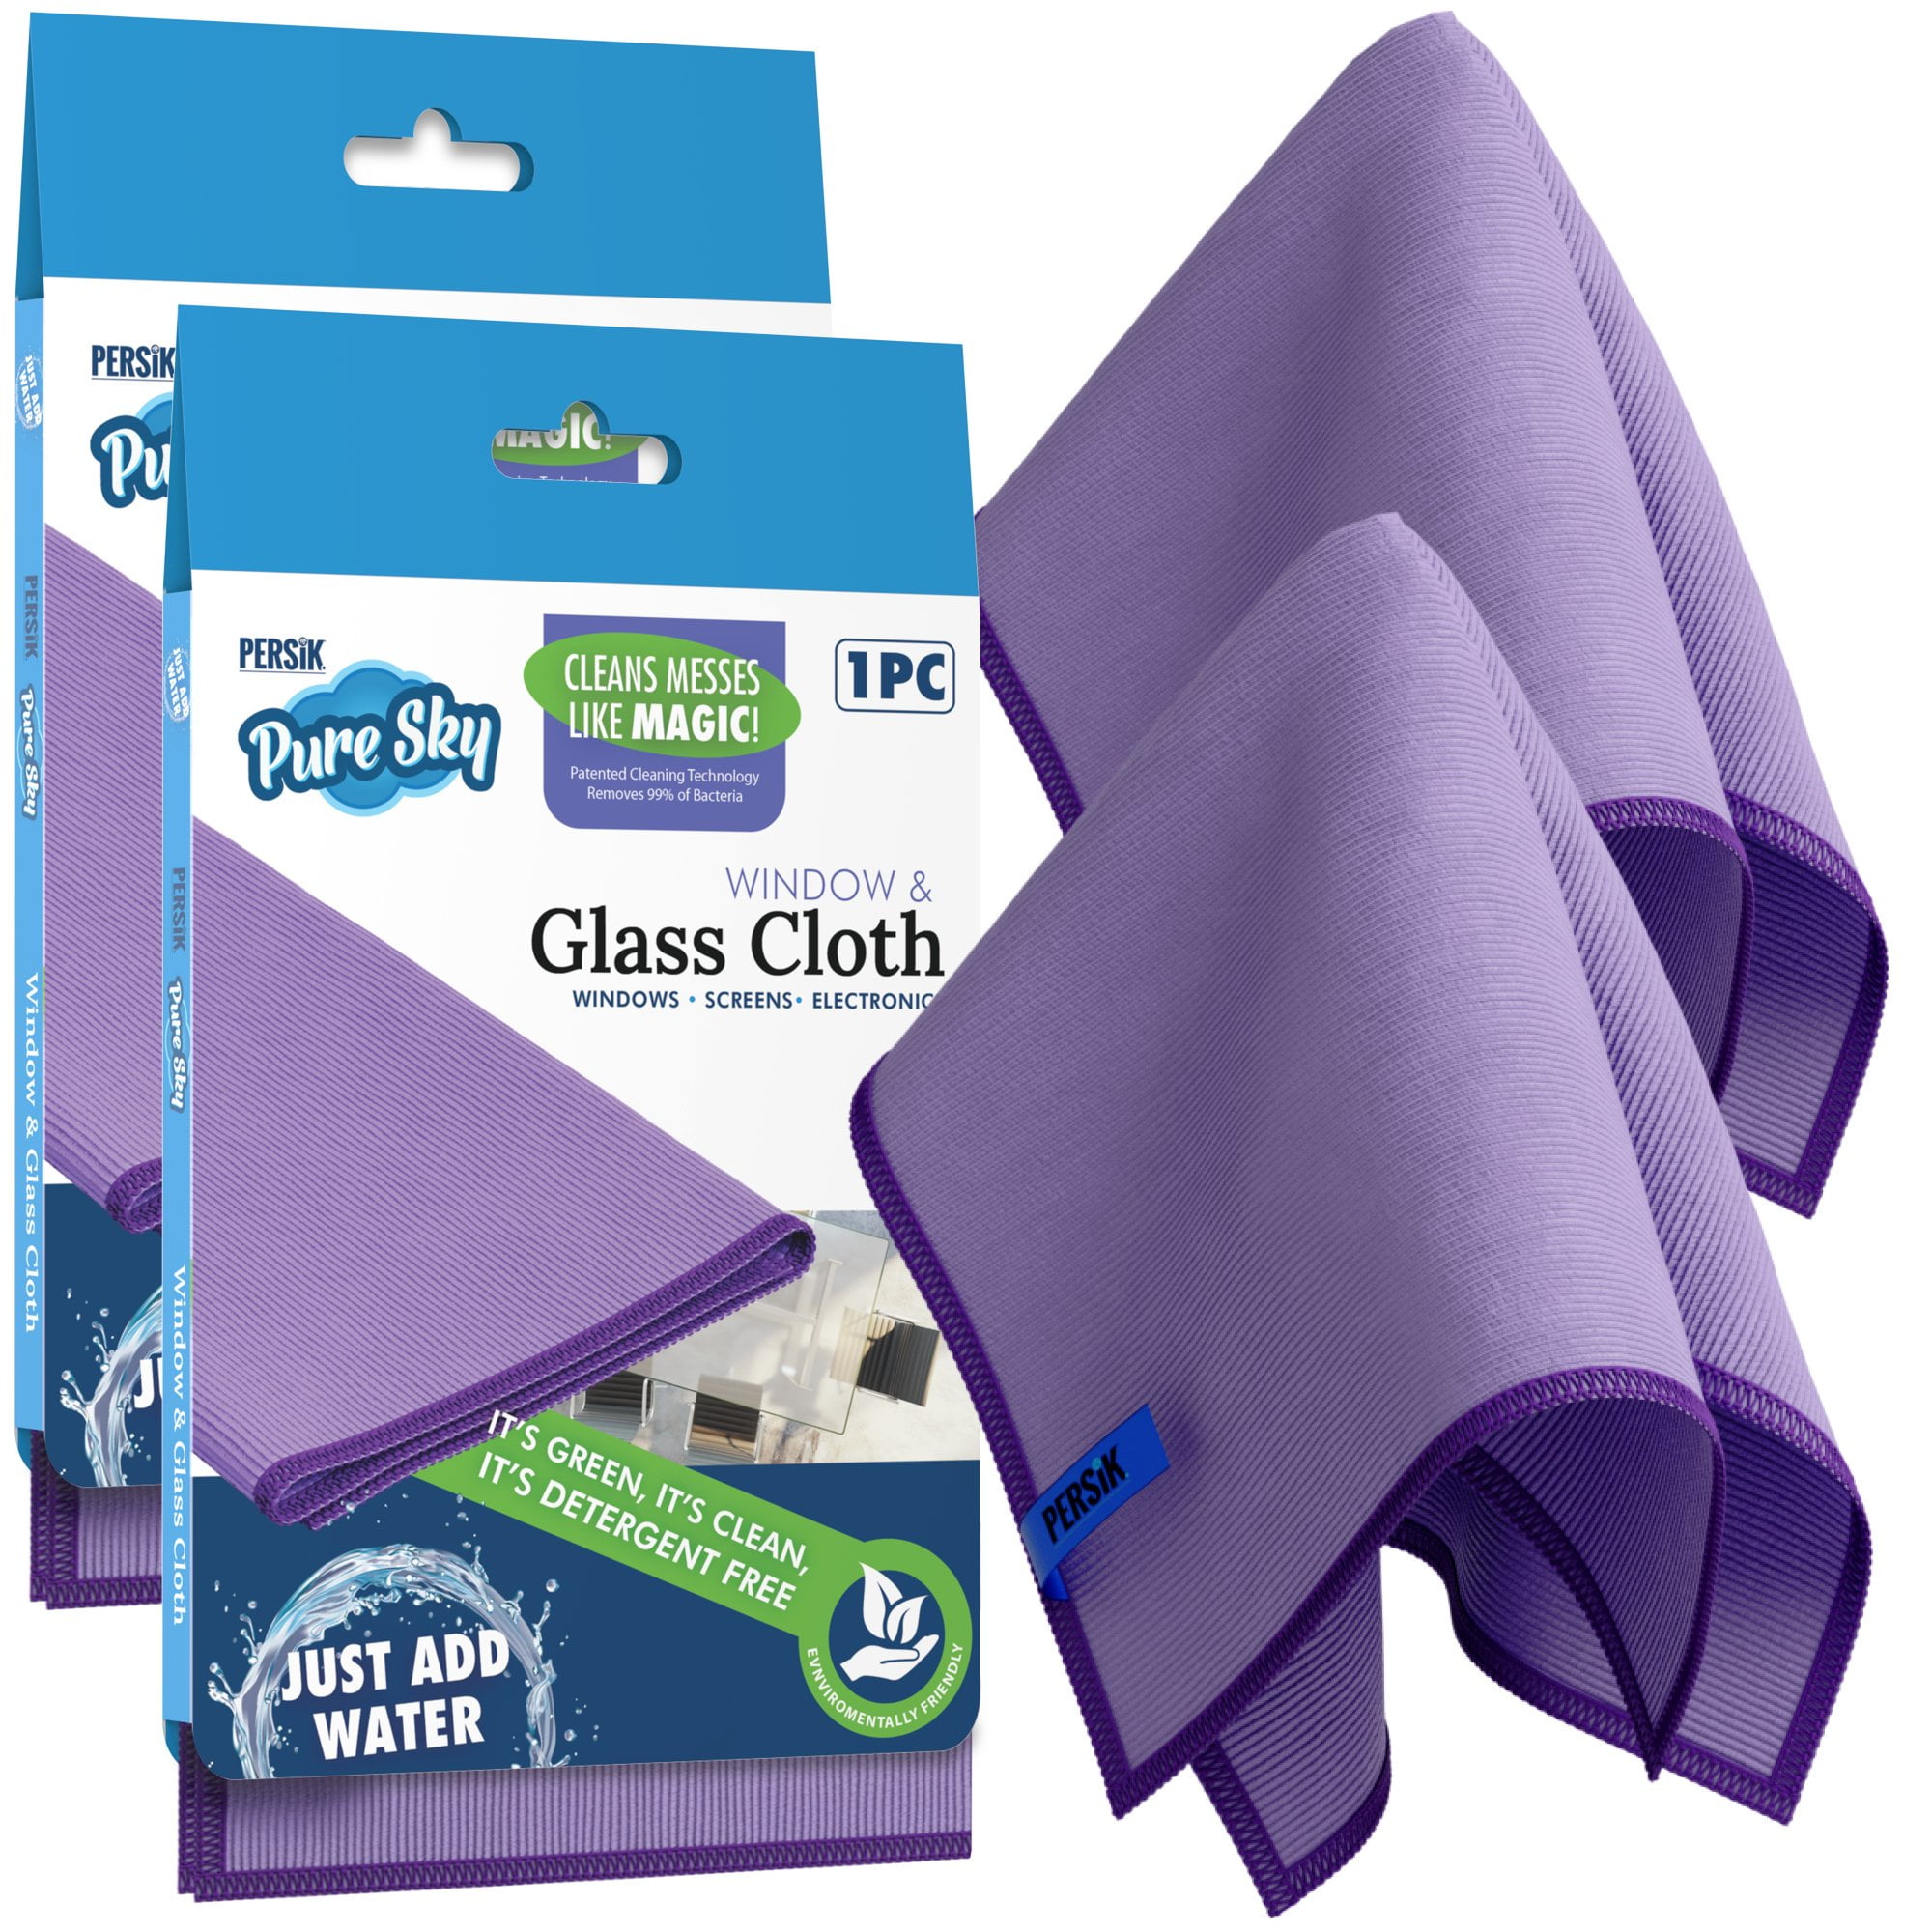 4 Nano Technology Super Ultra Microfiber Cleaning Cloth Best Absorbent for sale online 